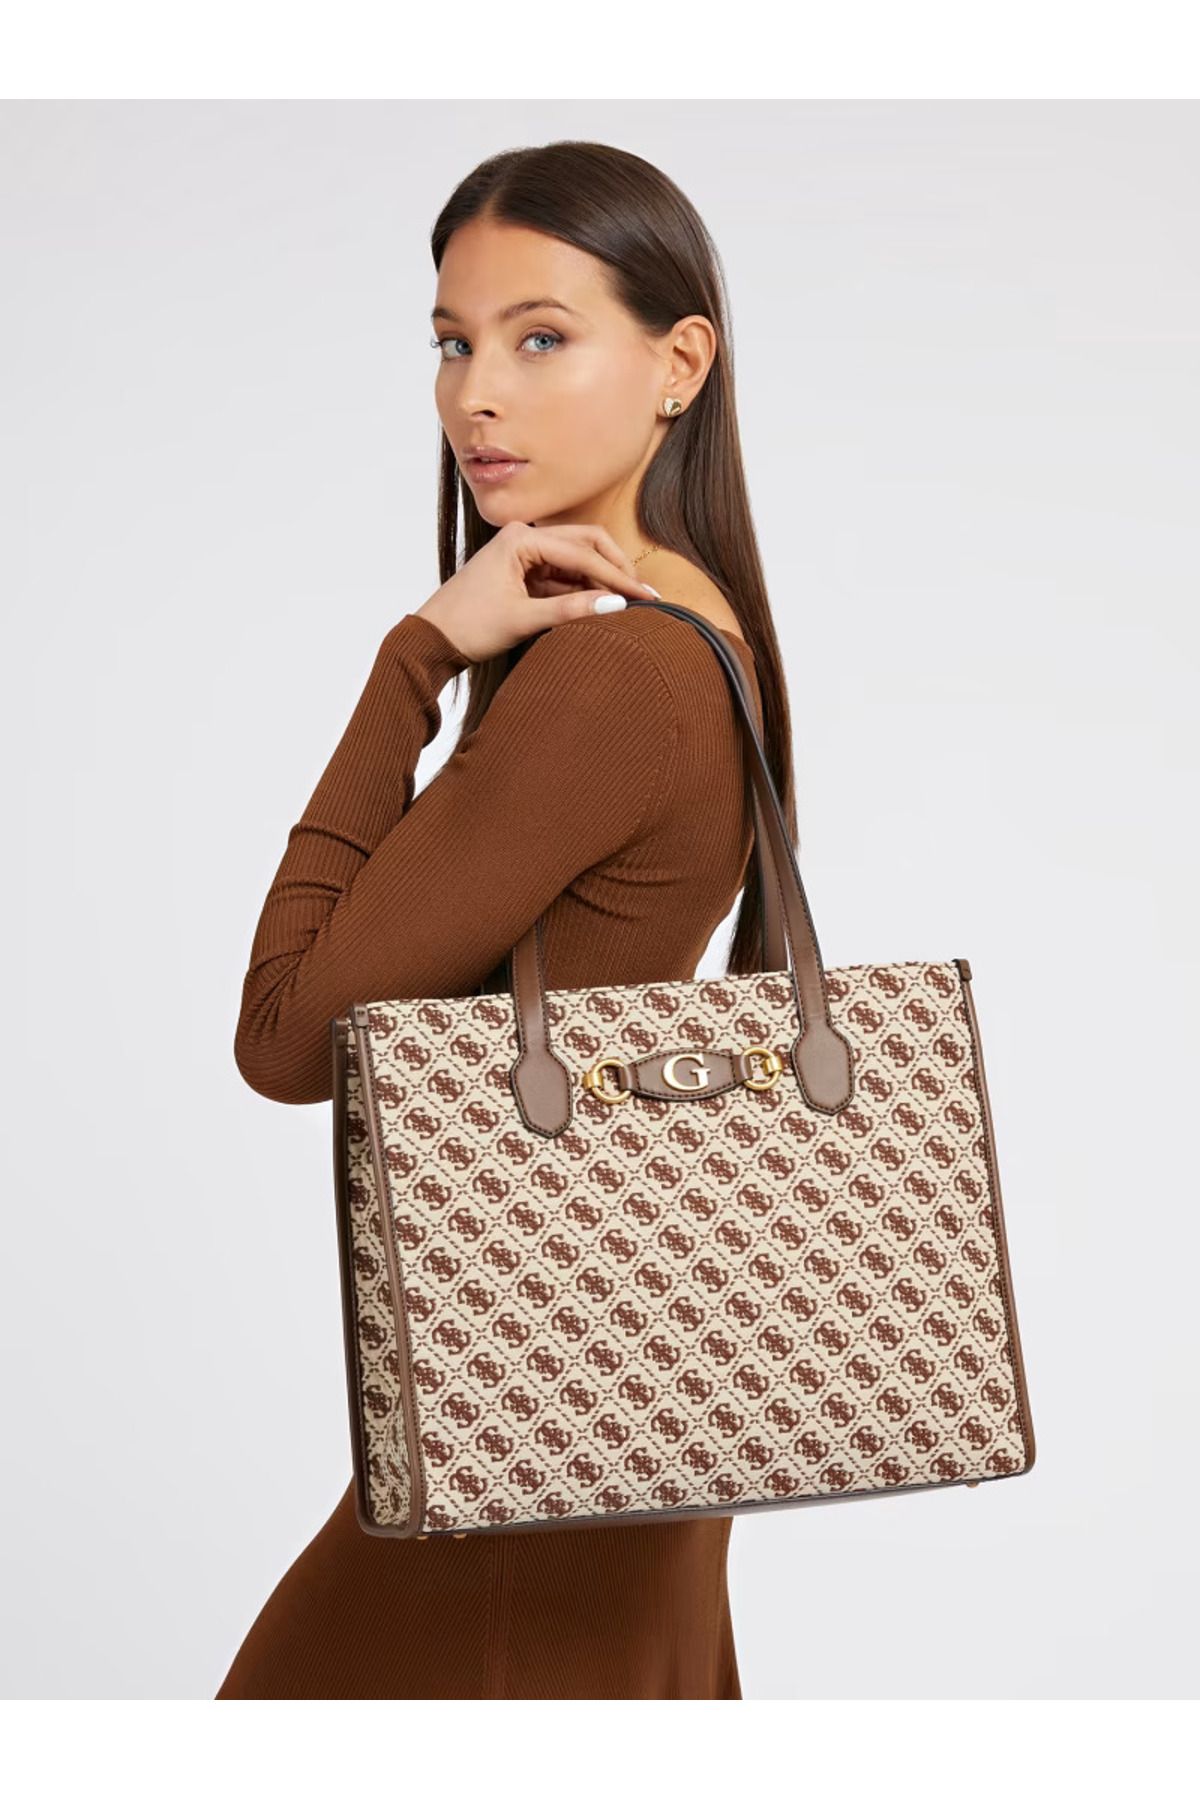 Guess Izzy Girlfriend Tote